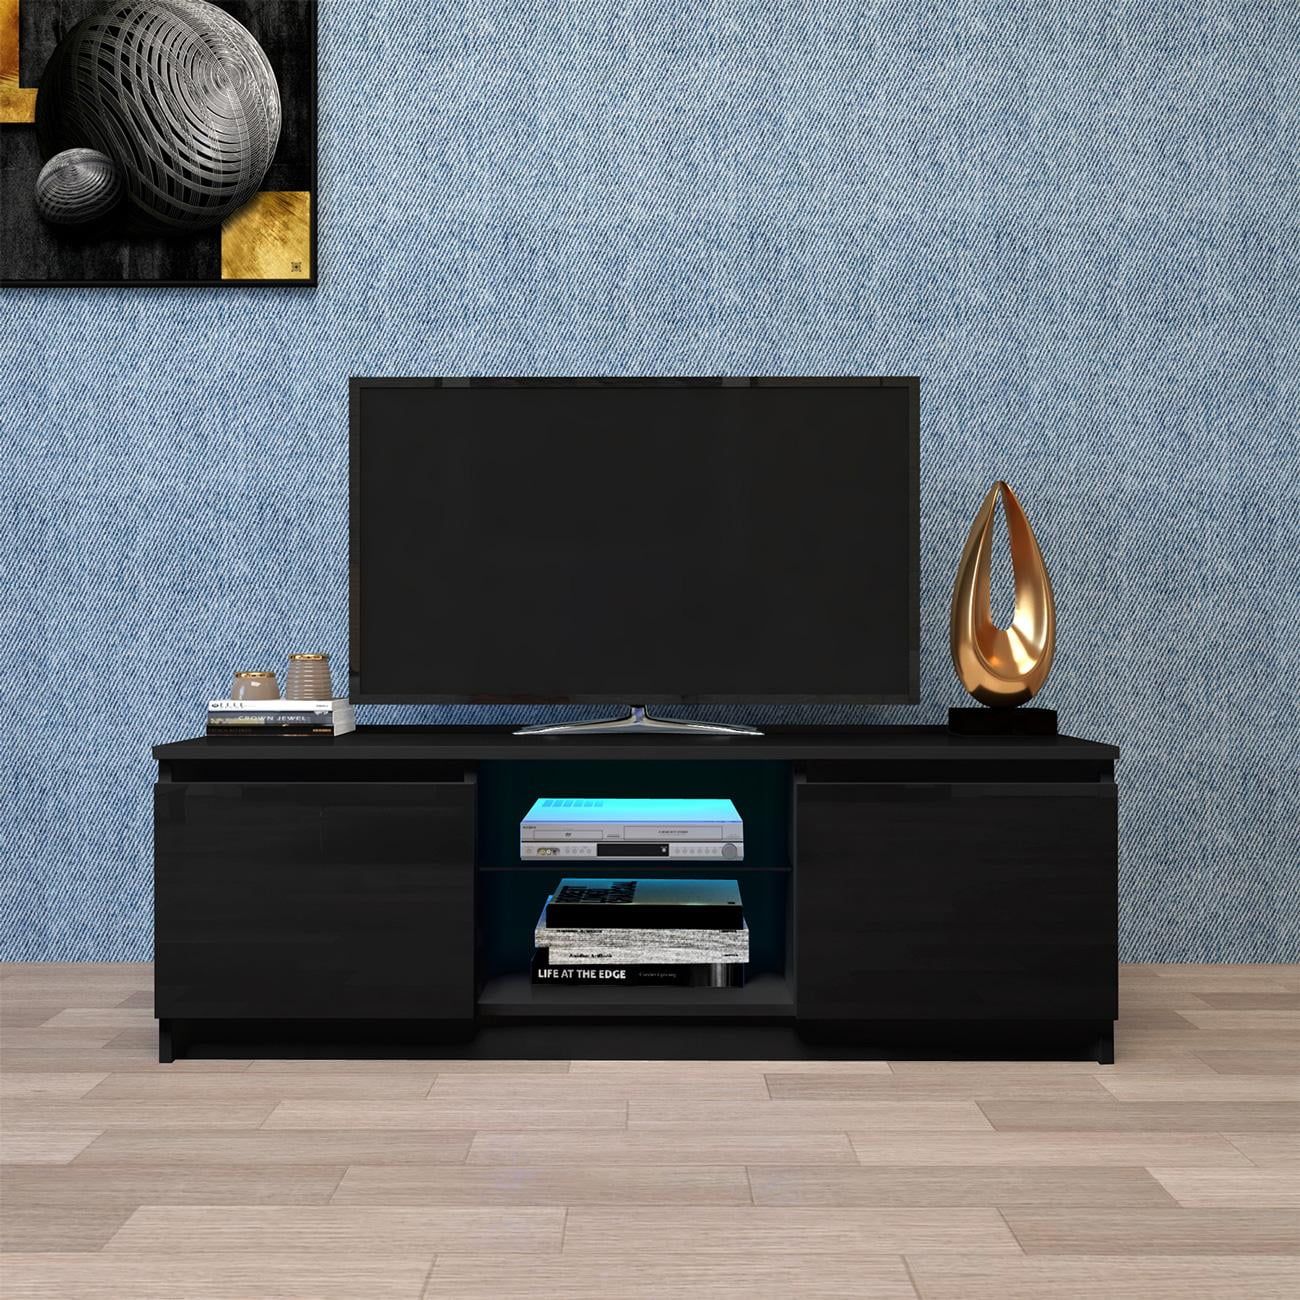 Tv Stand With Storage Drawers Shelves Led Rgb Lights, For Flat Tv 40 55 Inside Black Rgb Entertainment Centers (View 3 of 20)